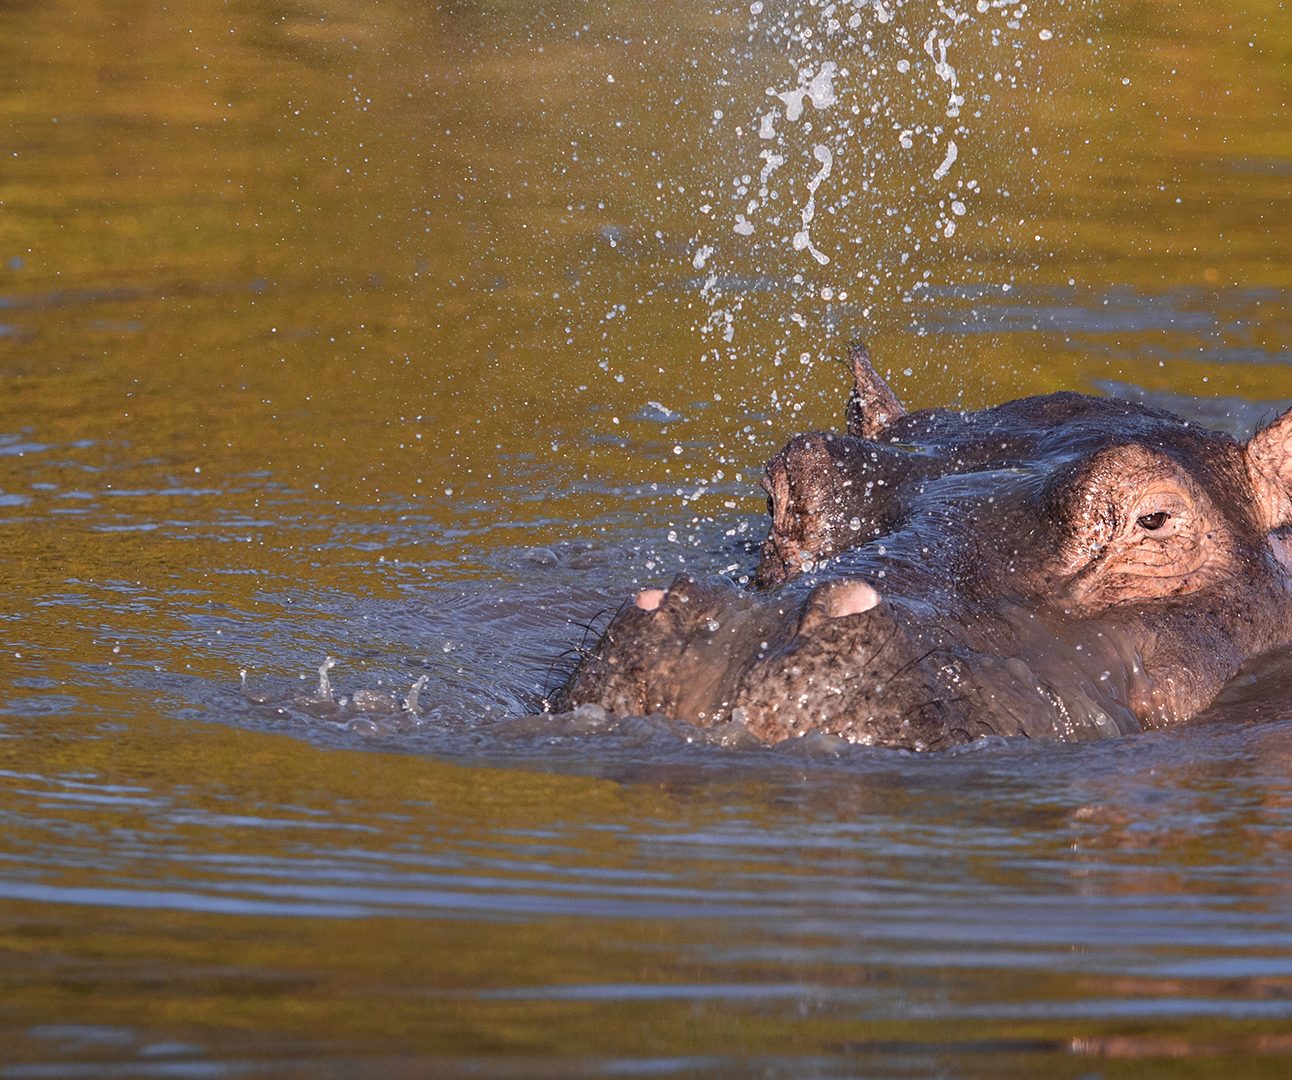 A hippo's head partially comes above the water, with water being blown from its nostrils